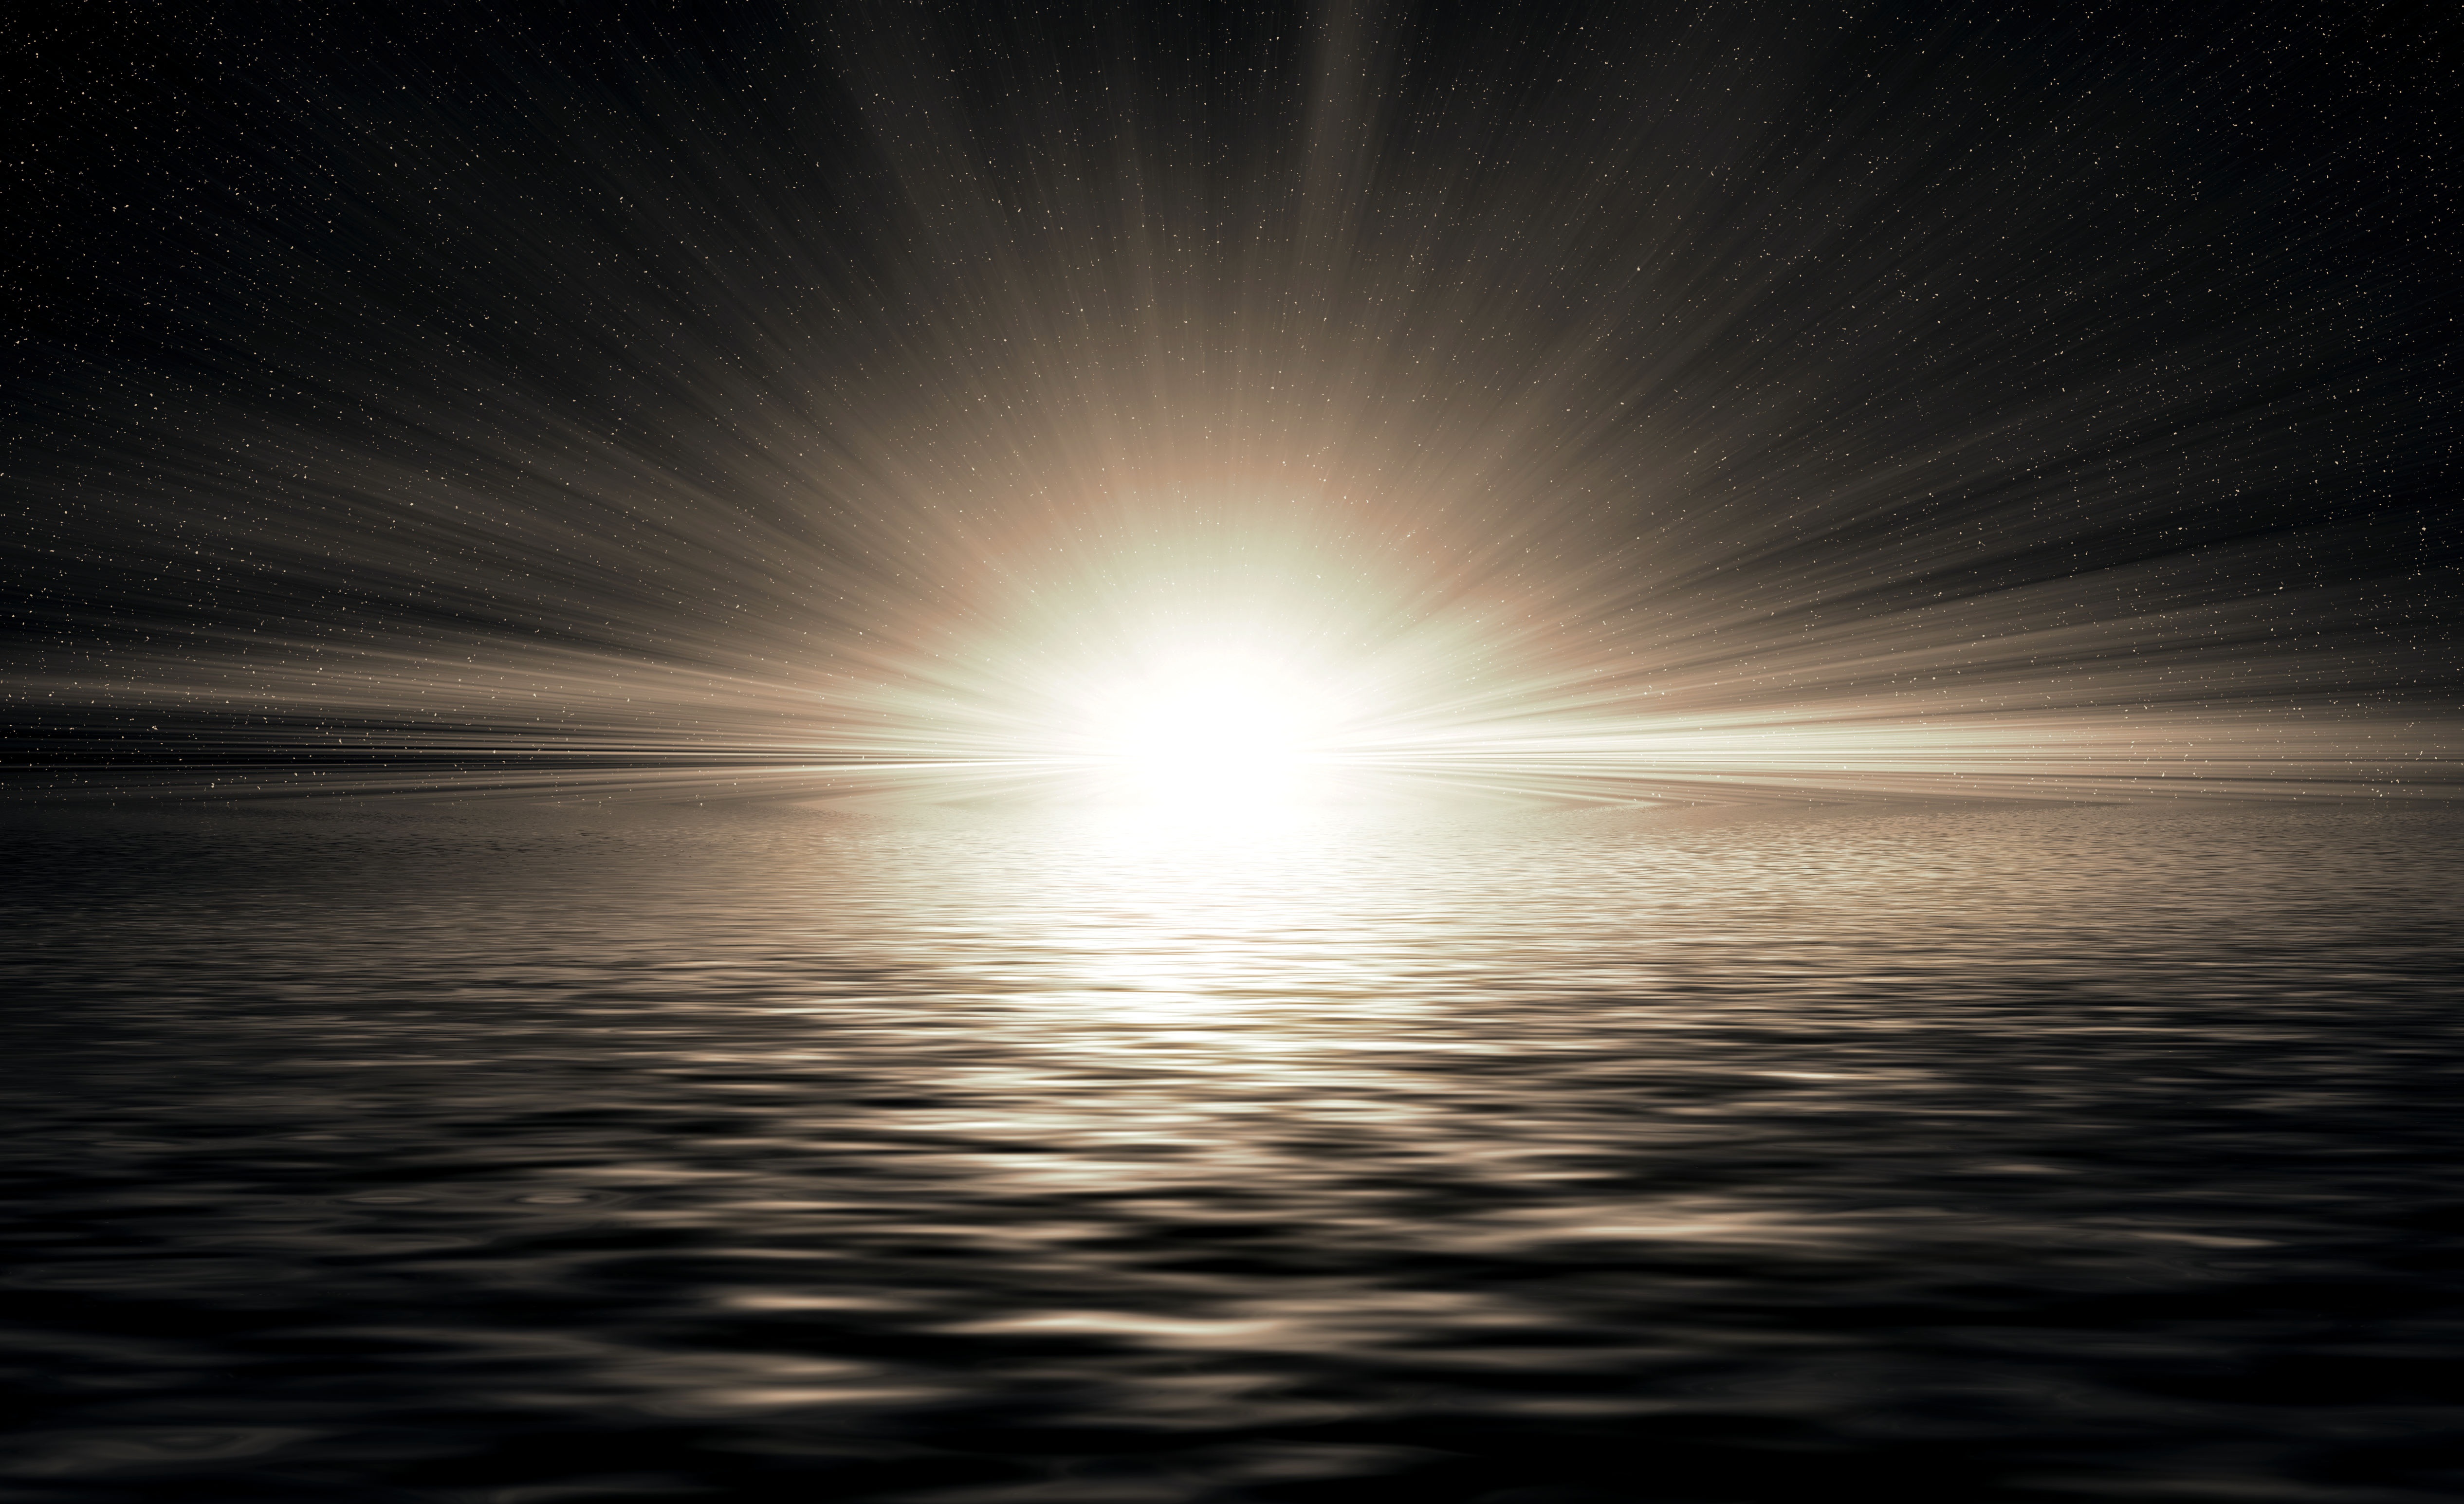 148125 download wallpaper 3d, shining, horizon, ripples, ripple, sunlight screensavers and pictures for free